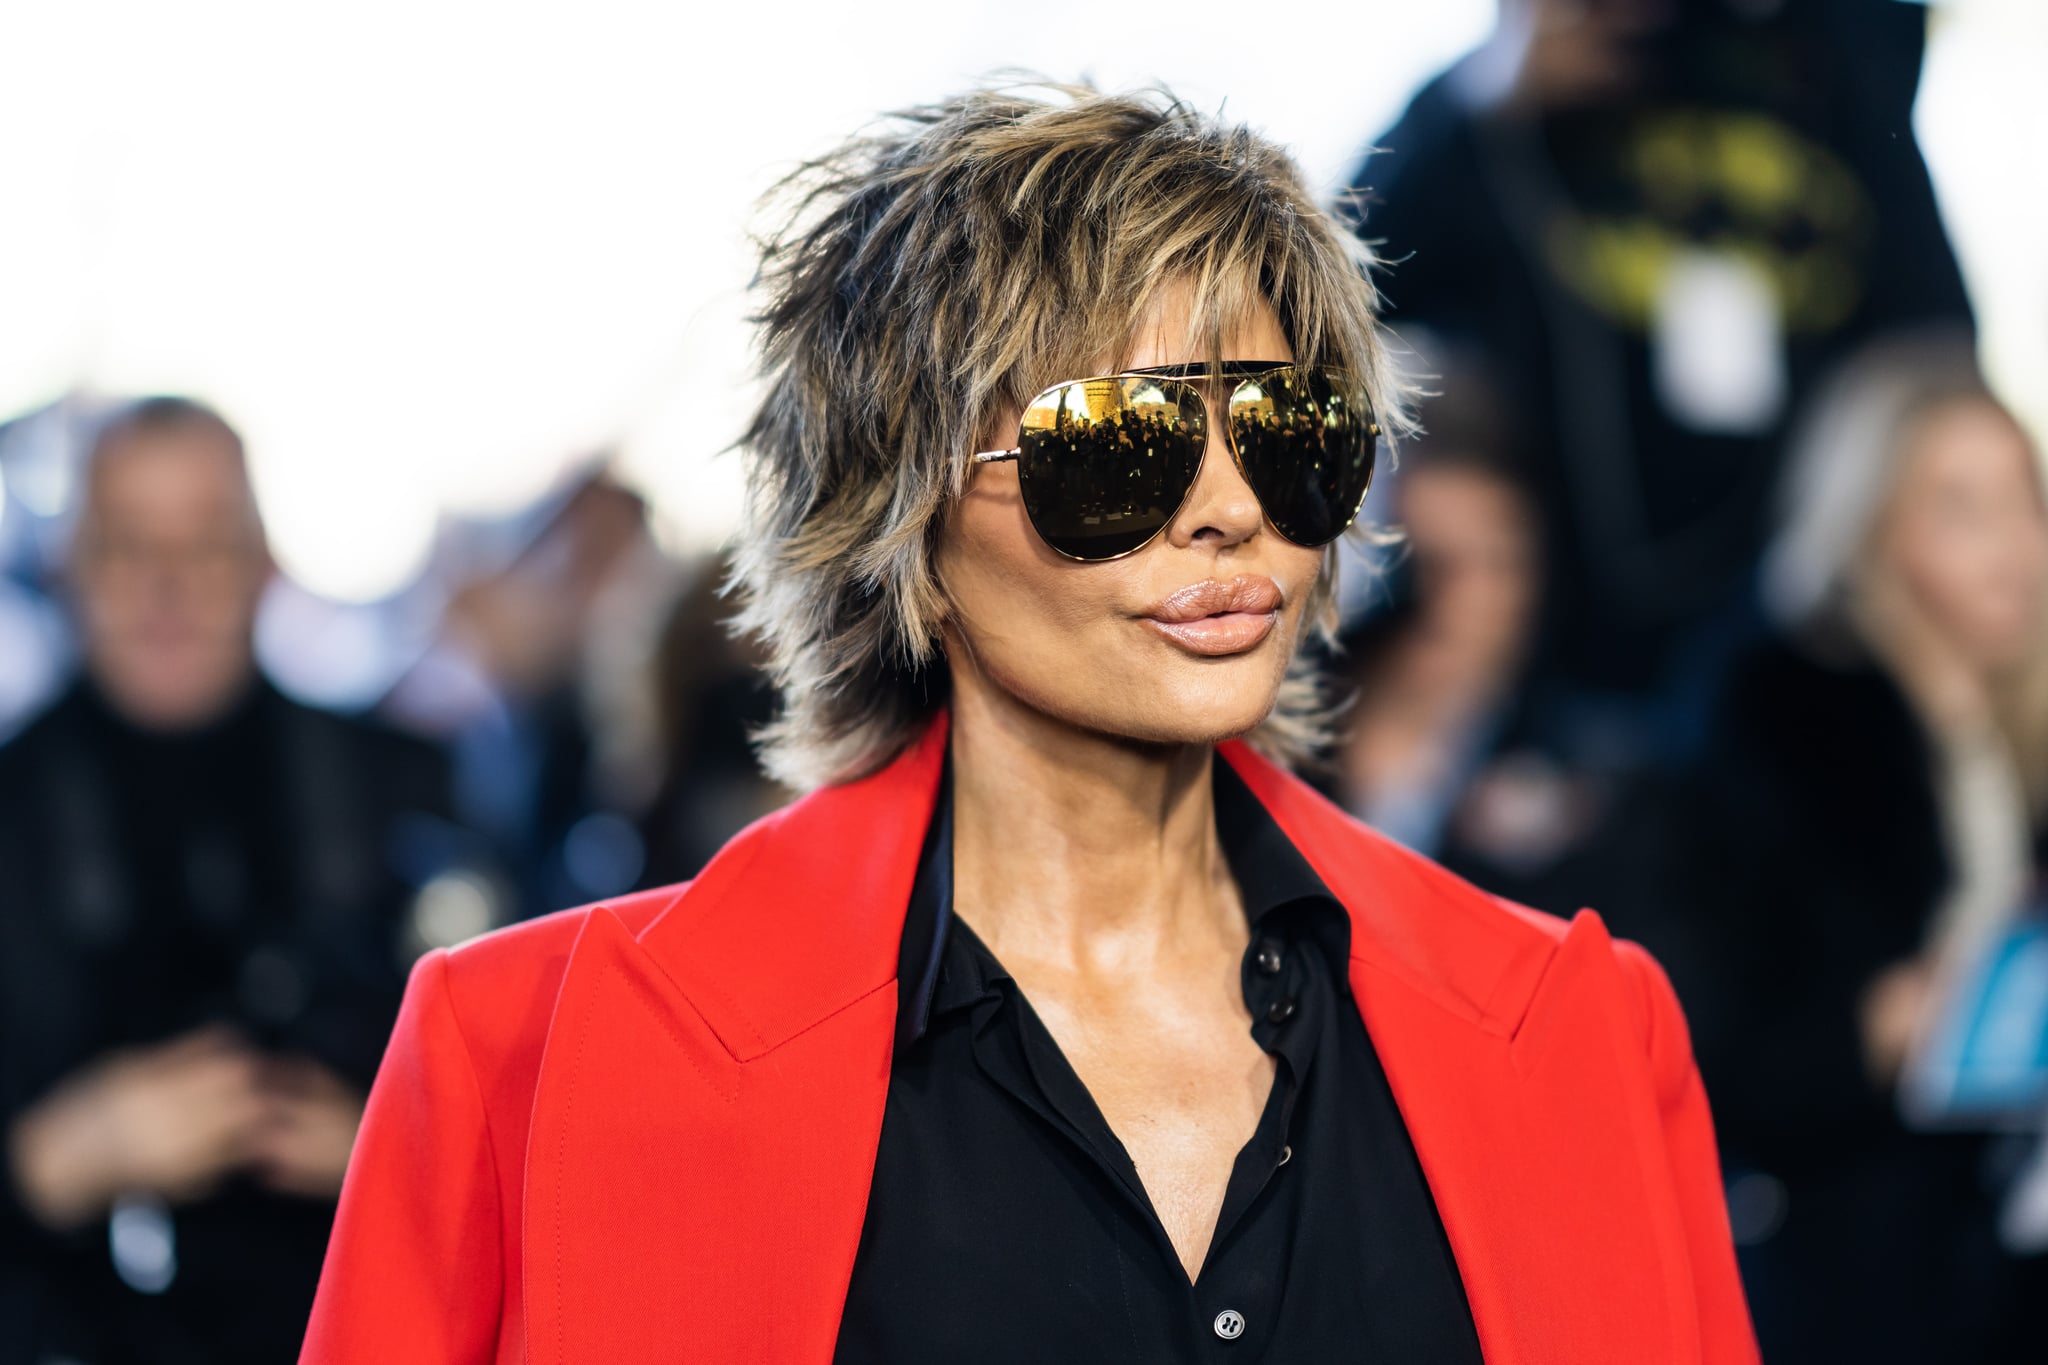 NEW YORK, NEW YORK - FEBRUARY 15: Lisa Rinna attends the Michael Kors fashion show during New York Fashion Week: The Shows in the Meatpacking District on February 15, 2023 in New York City. (Photo by Gotham/WireImage)